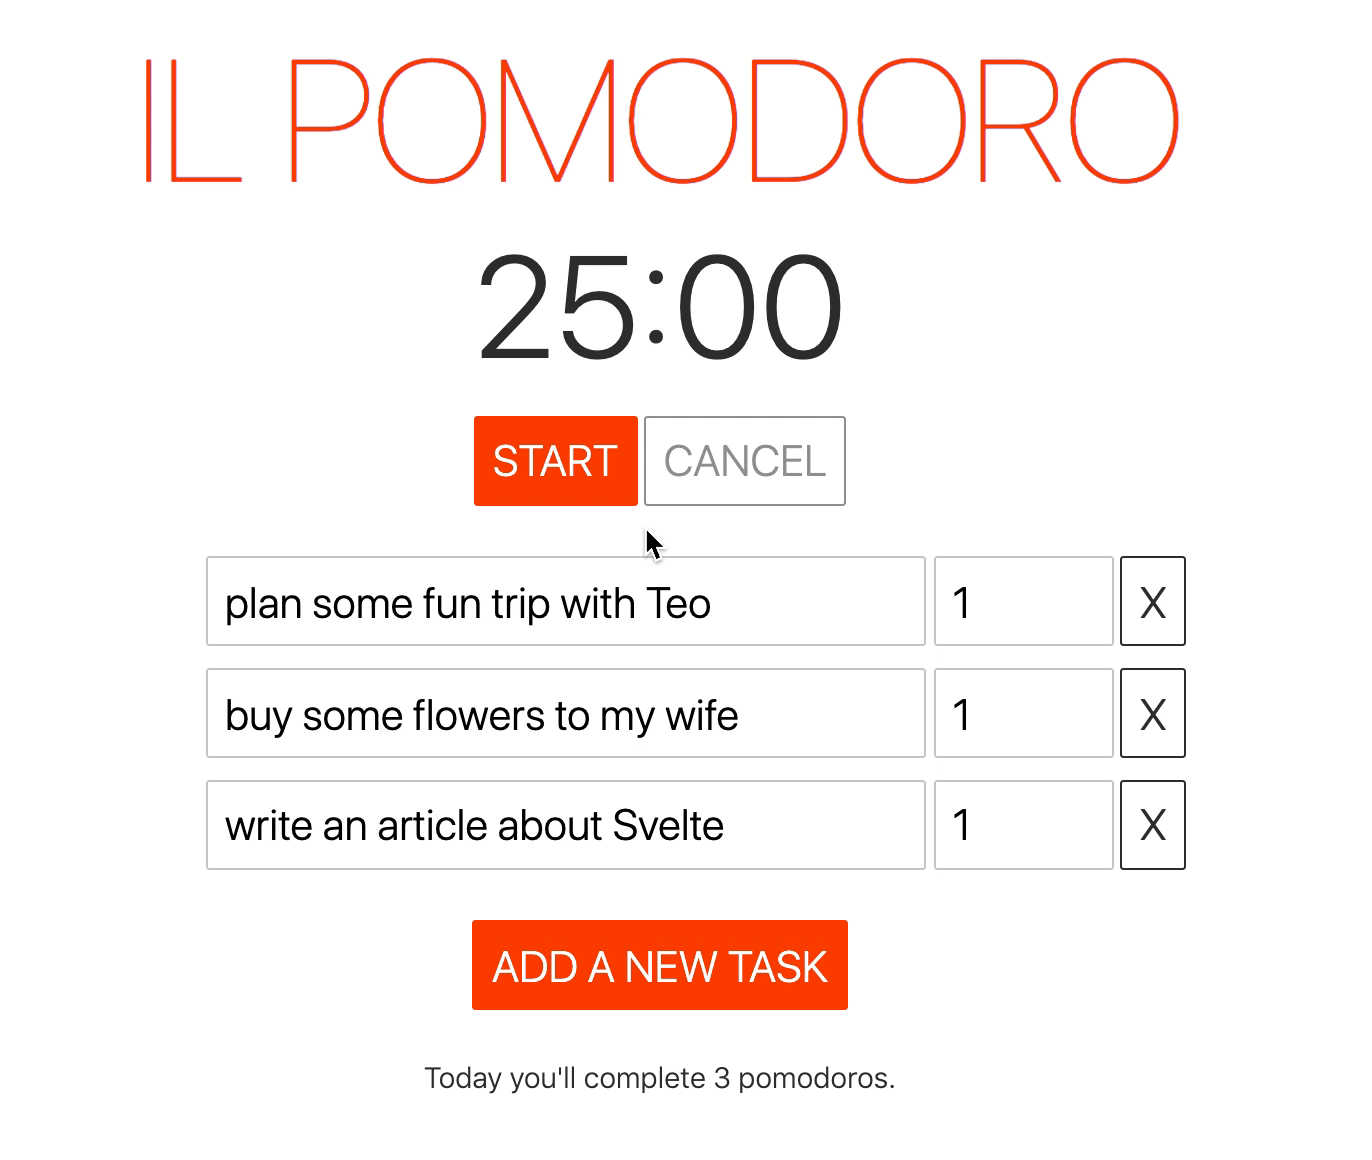 A pomodoro app with a timer and a series of tasks. The user clicks on start and the pomodoro timer starts its countdown. Then they click on cancel and the pomodor stops. The buttons are only enabled when it makes sense. The styles have been improved from previous iterations.